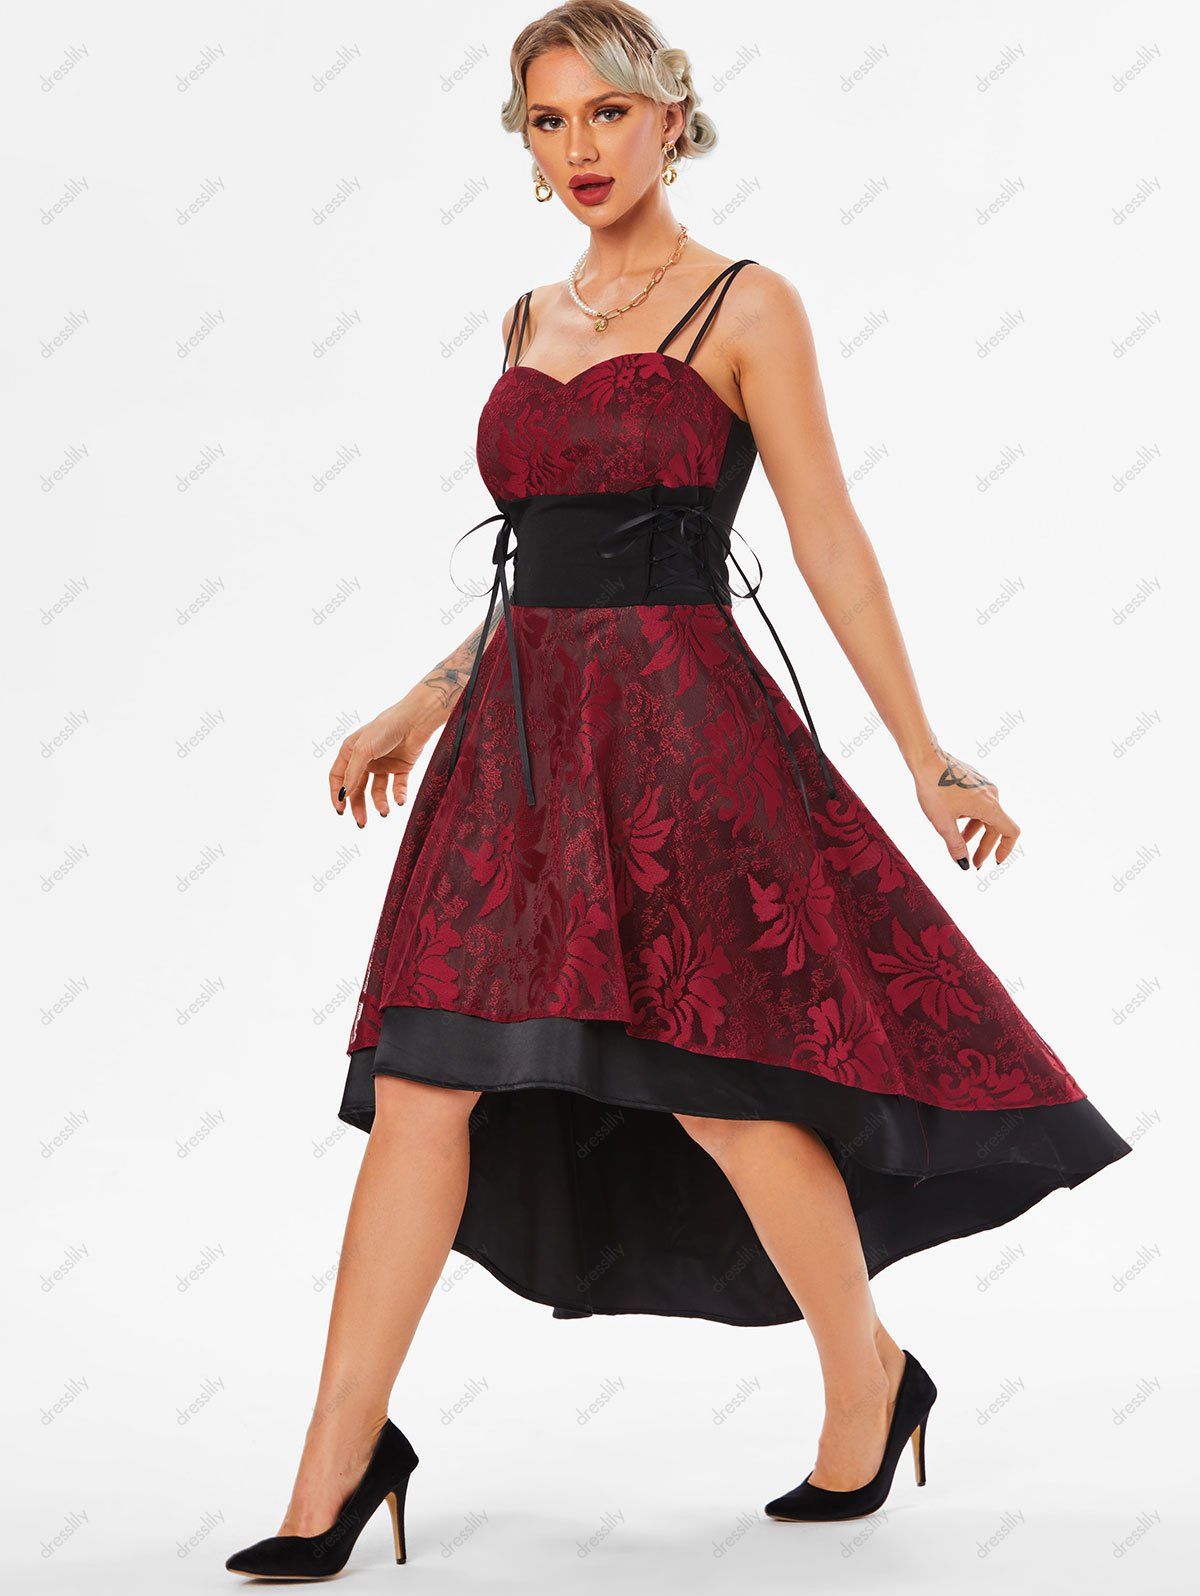 Summer Lace Up Corset Waist High Low Dress - RED WINE S